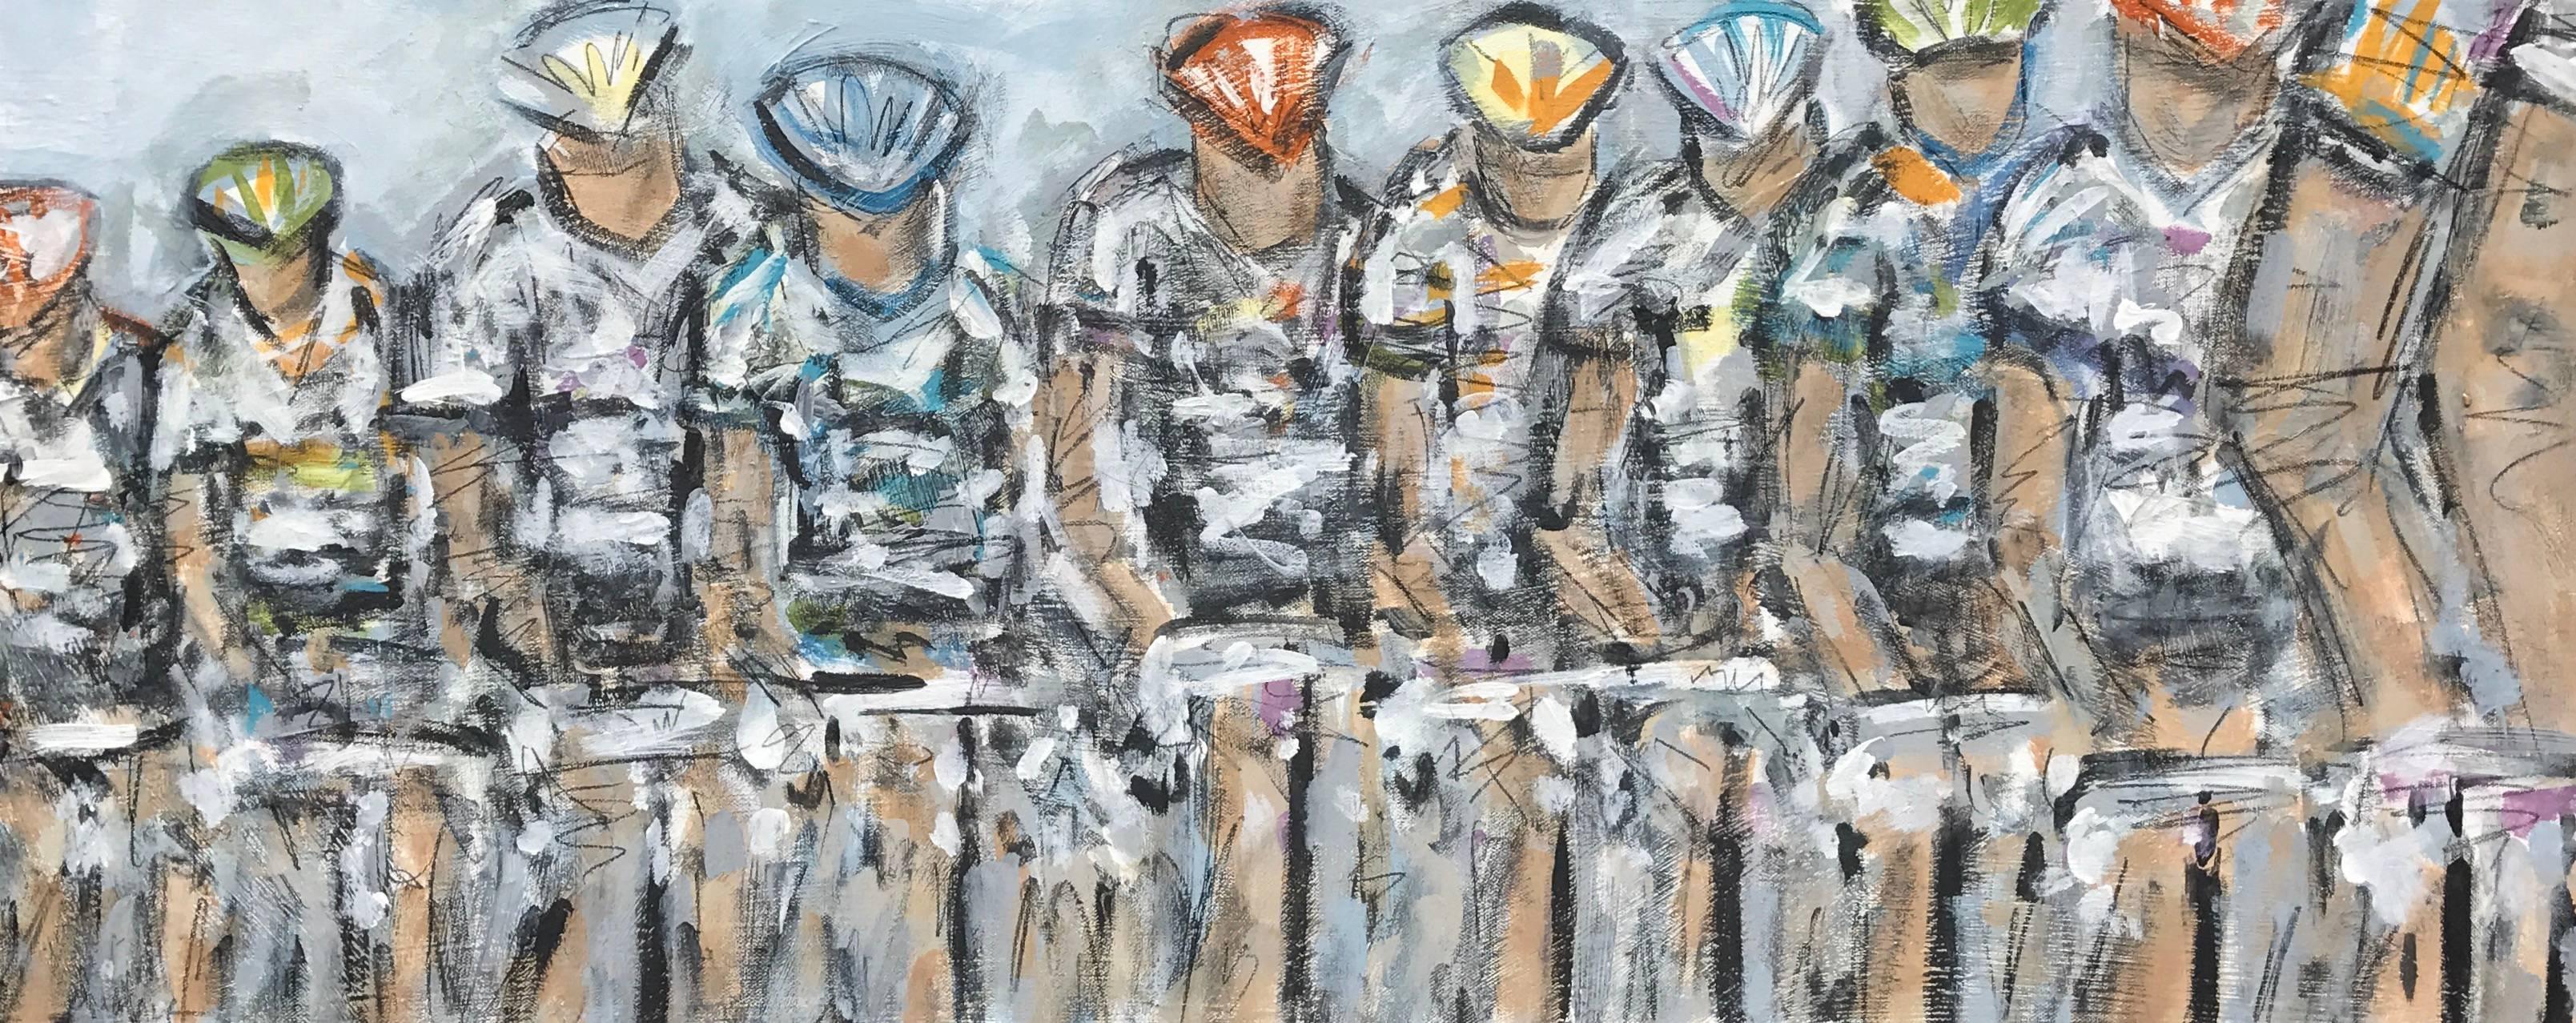 Heather Blanton Figurative Painting - 'Cycling Line Up', Chalk, Paint and Pencil on Canvas Horizontal Painting